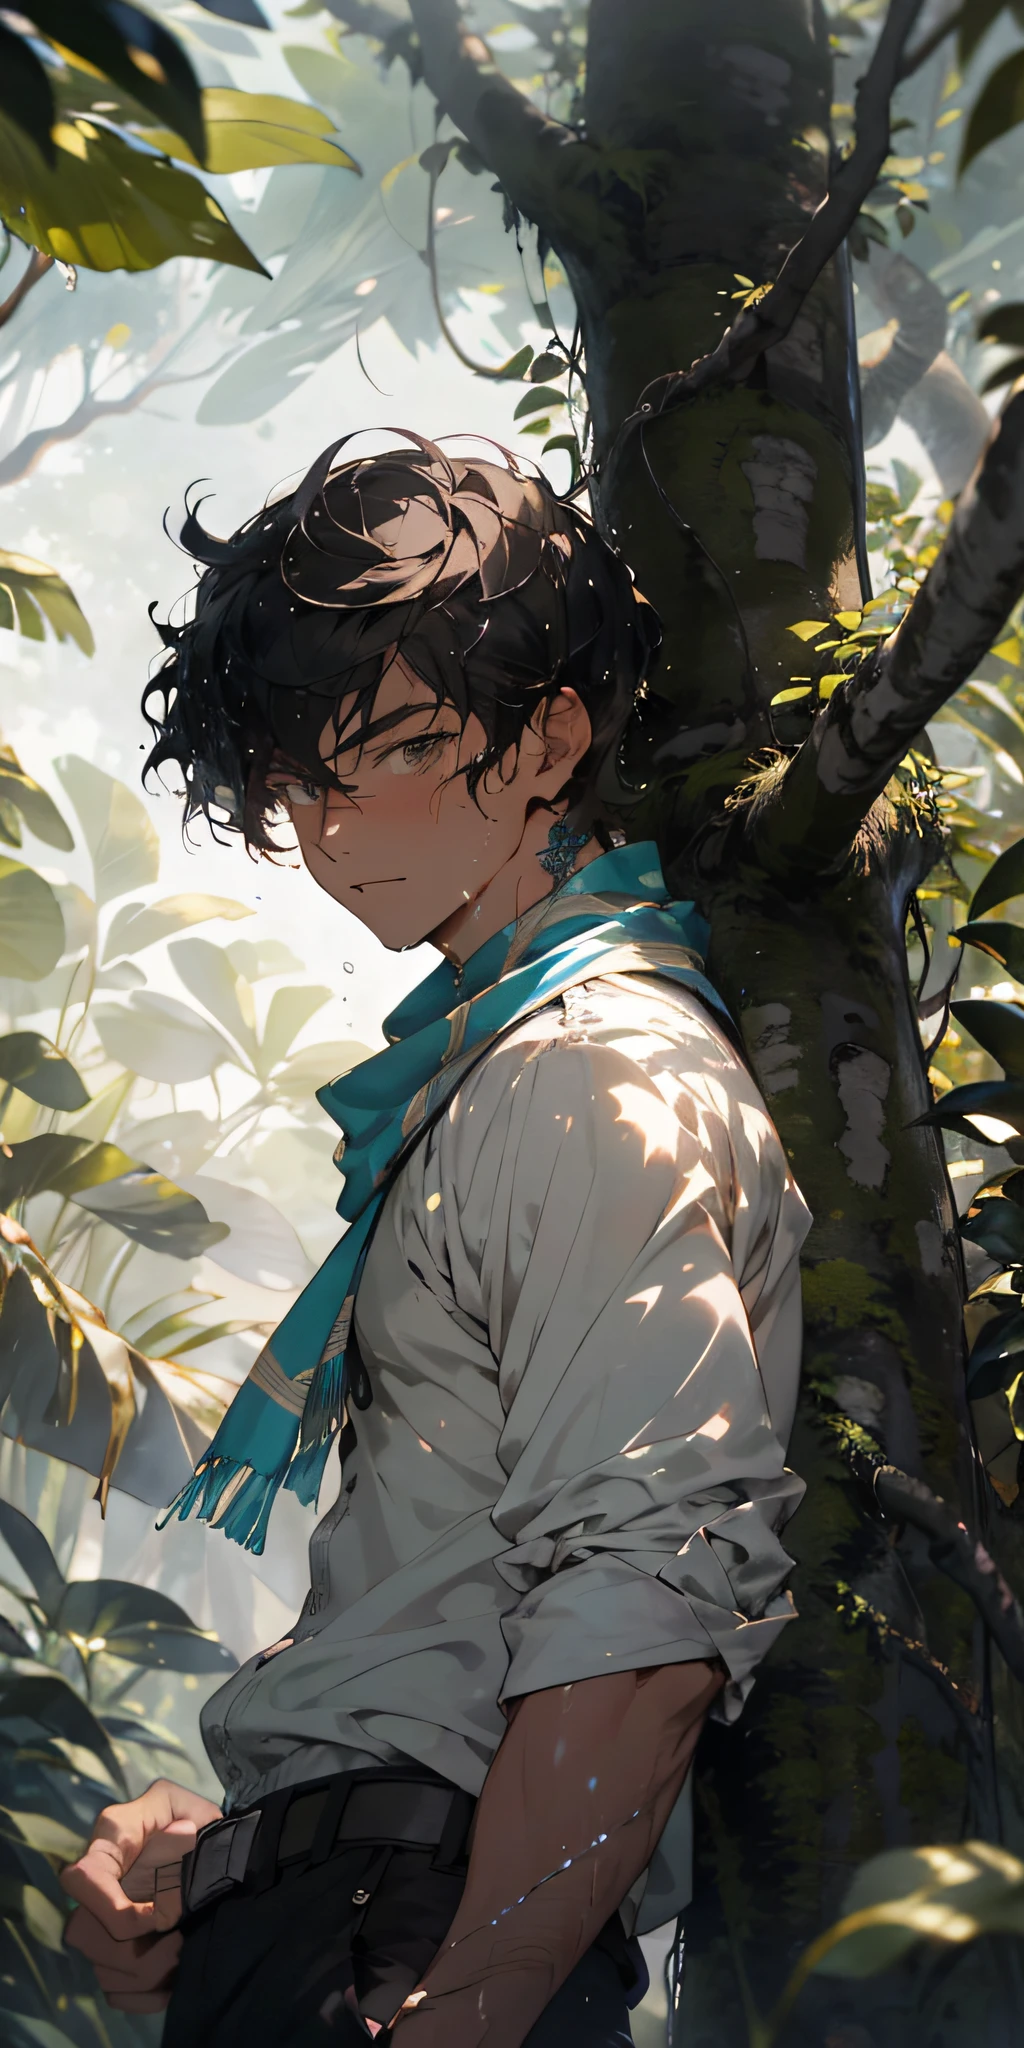 Beautiful close-up((adventurer)),（（giant and wet trees）），jungles,oases,realisticlying，（tmasterpiece，top Quority，best qualtiy，offcial art），The is very detailed，Colorful，Most detailed，Kamimei，short detailed hair，Black color hair，(magia)，Handsome man，White scarf